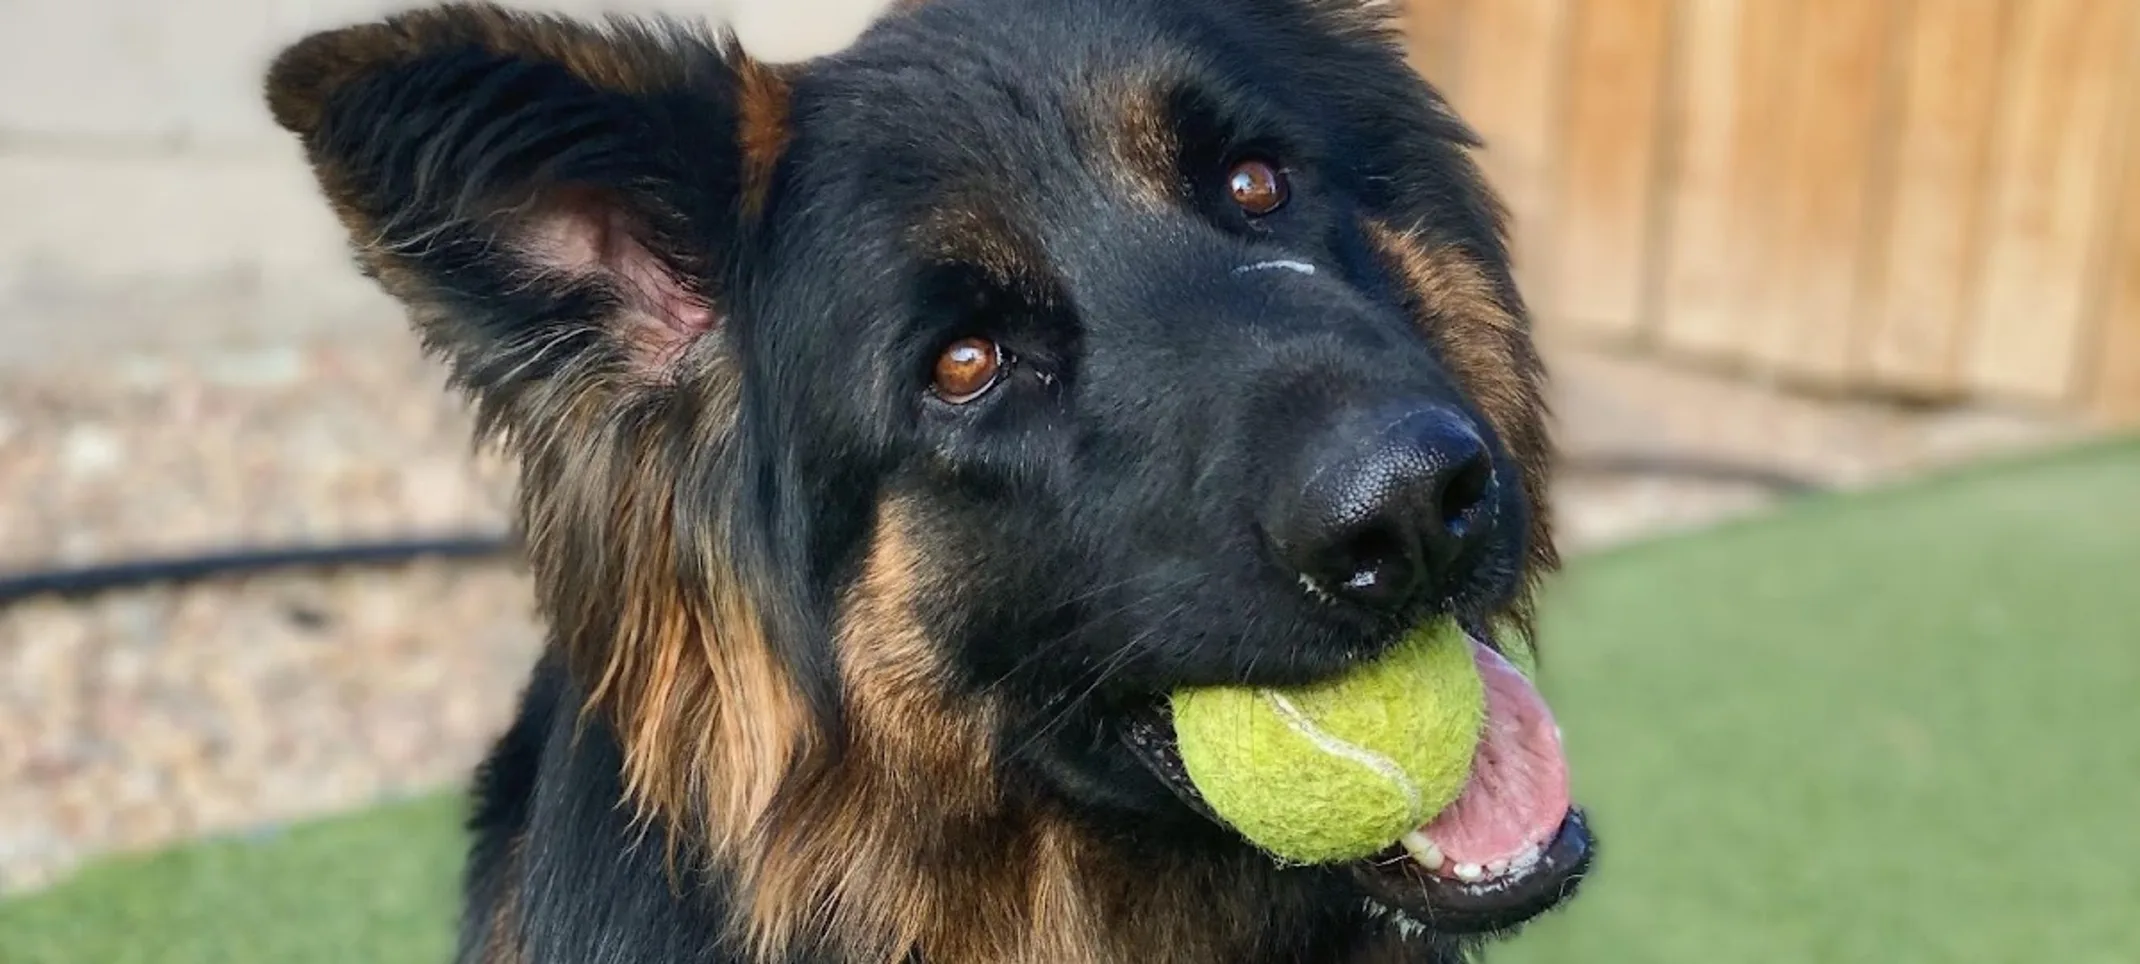 Dog With a Tennis Ball in his Mouth